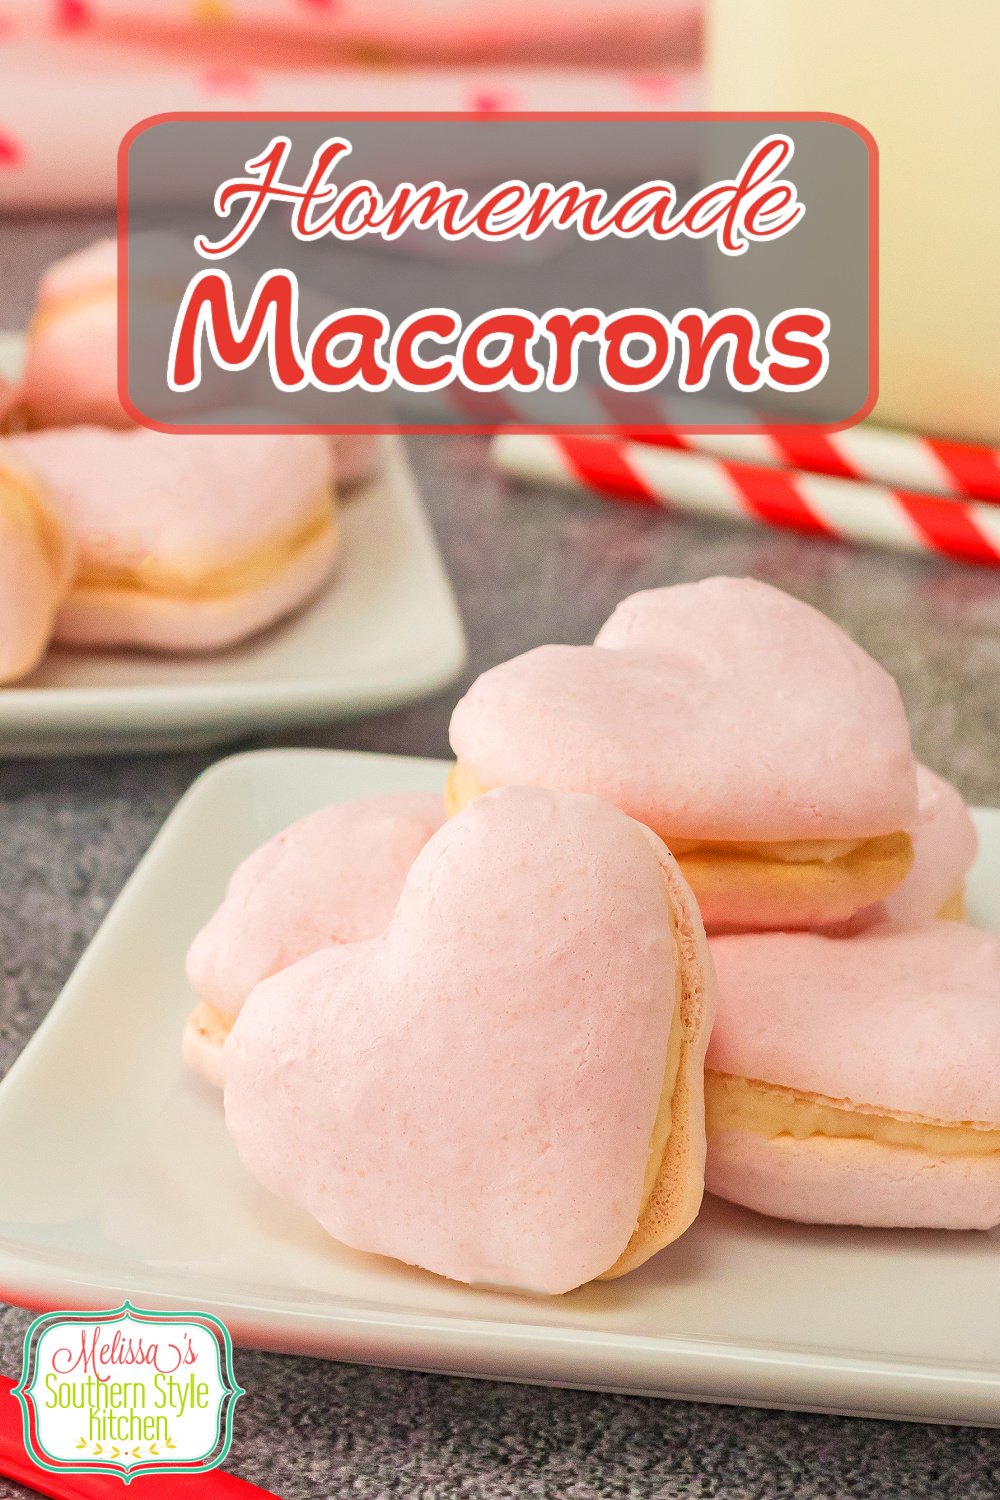 This Macarons Recipe features a light and airy cookie sandwiched together with a homemade vanilla buttercream. #macarons #macaronsrecipe #buttercreamicing #vanillabuttercream #cookies #cookierecipes #macaroons